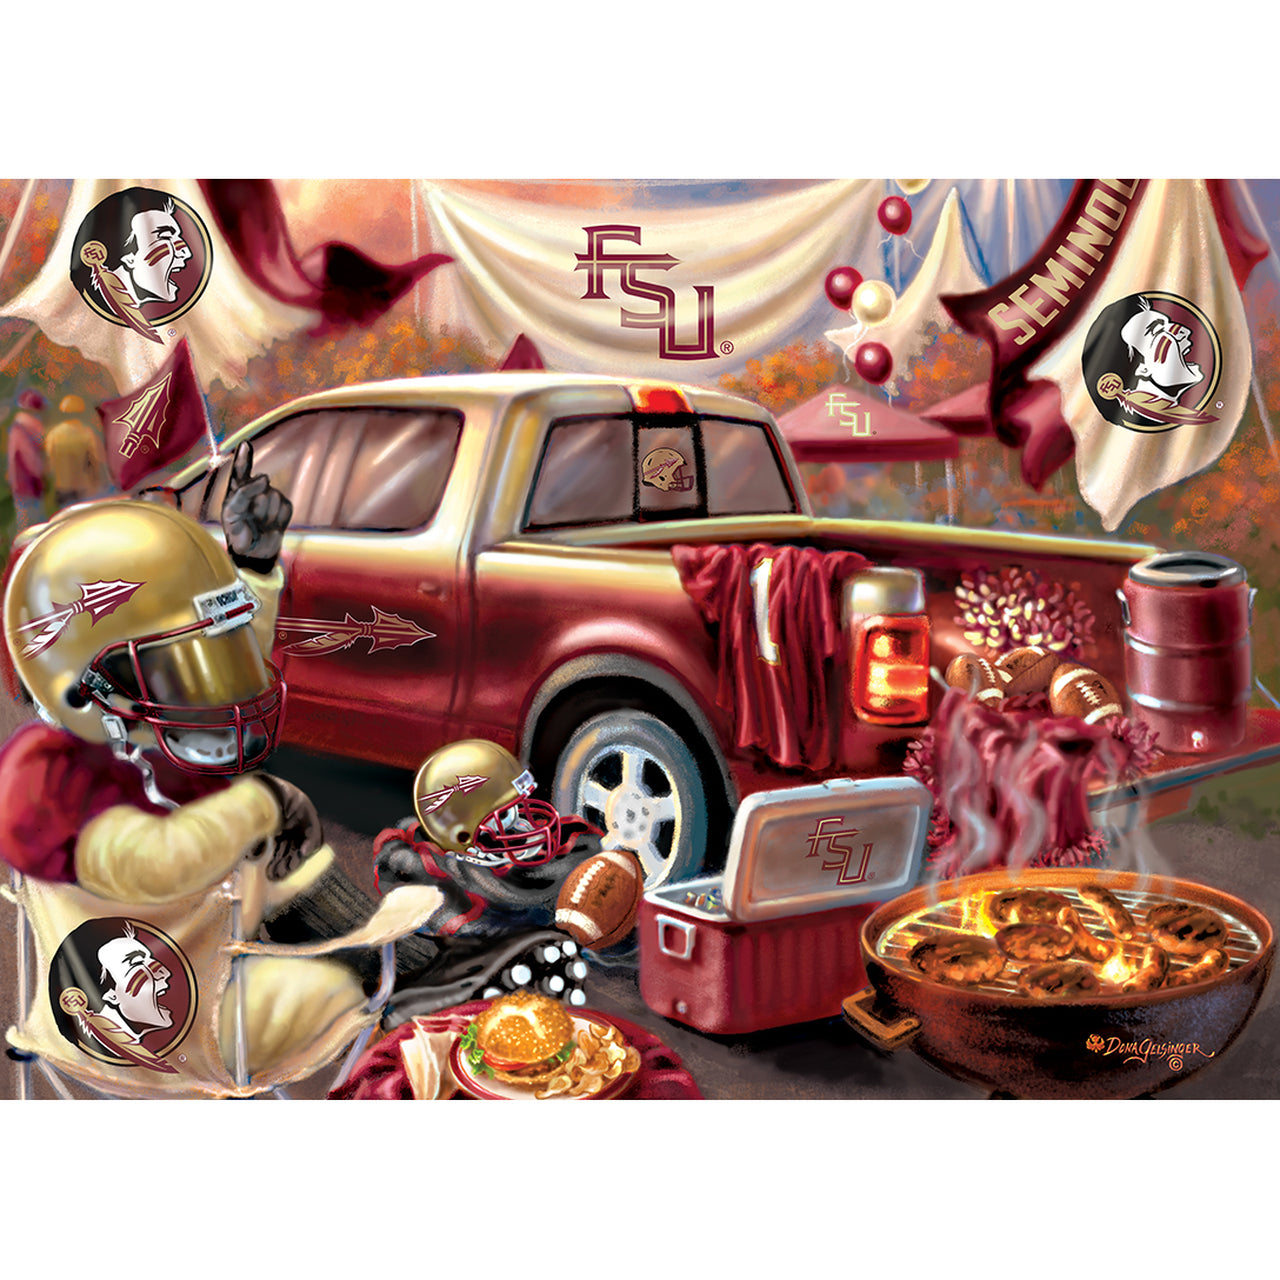 NCAA FLORIDA STATE GAMEDAY 1000 PIECE PUZZLE